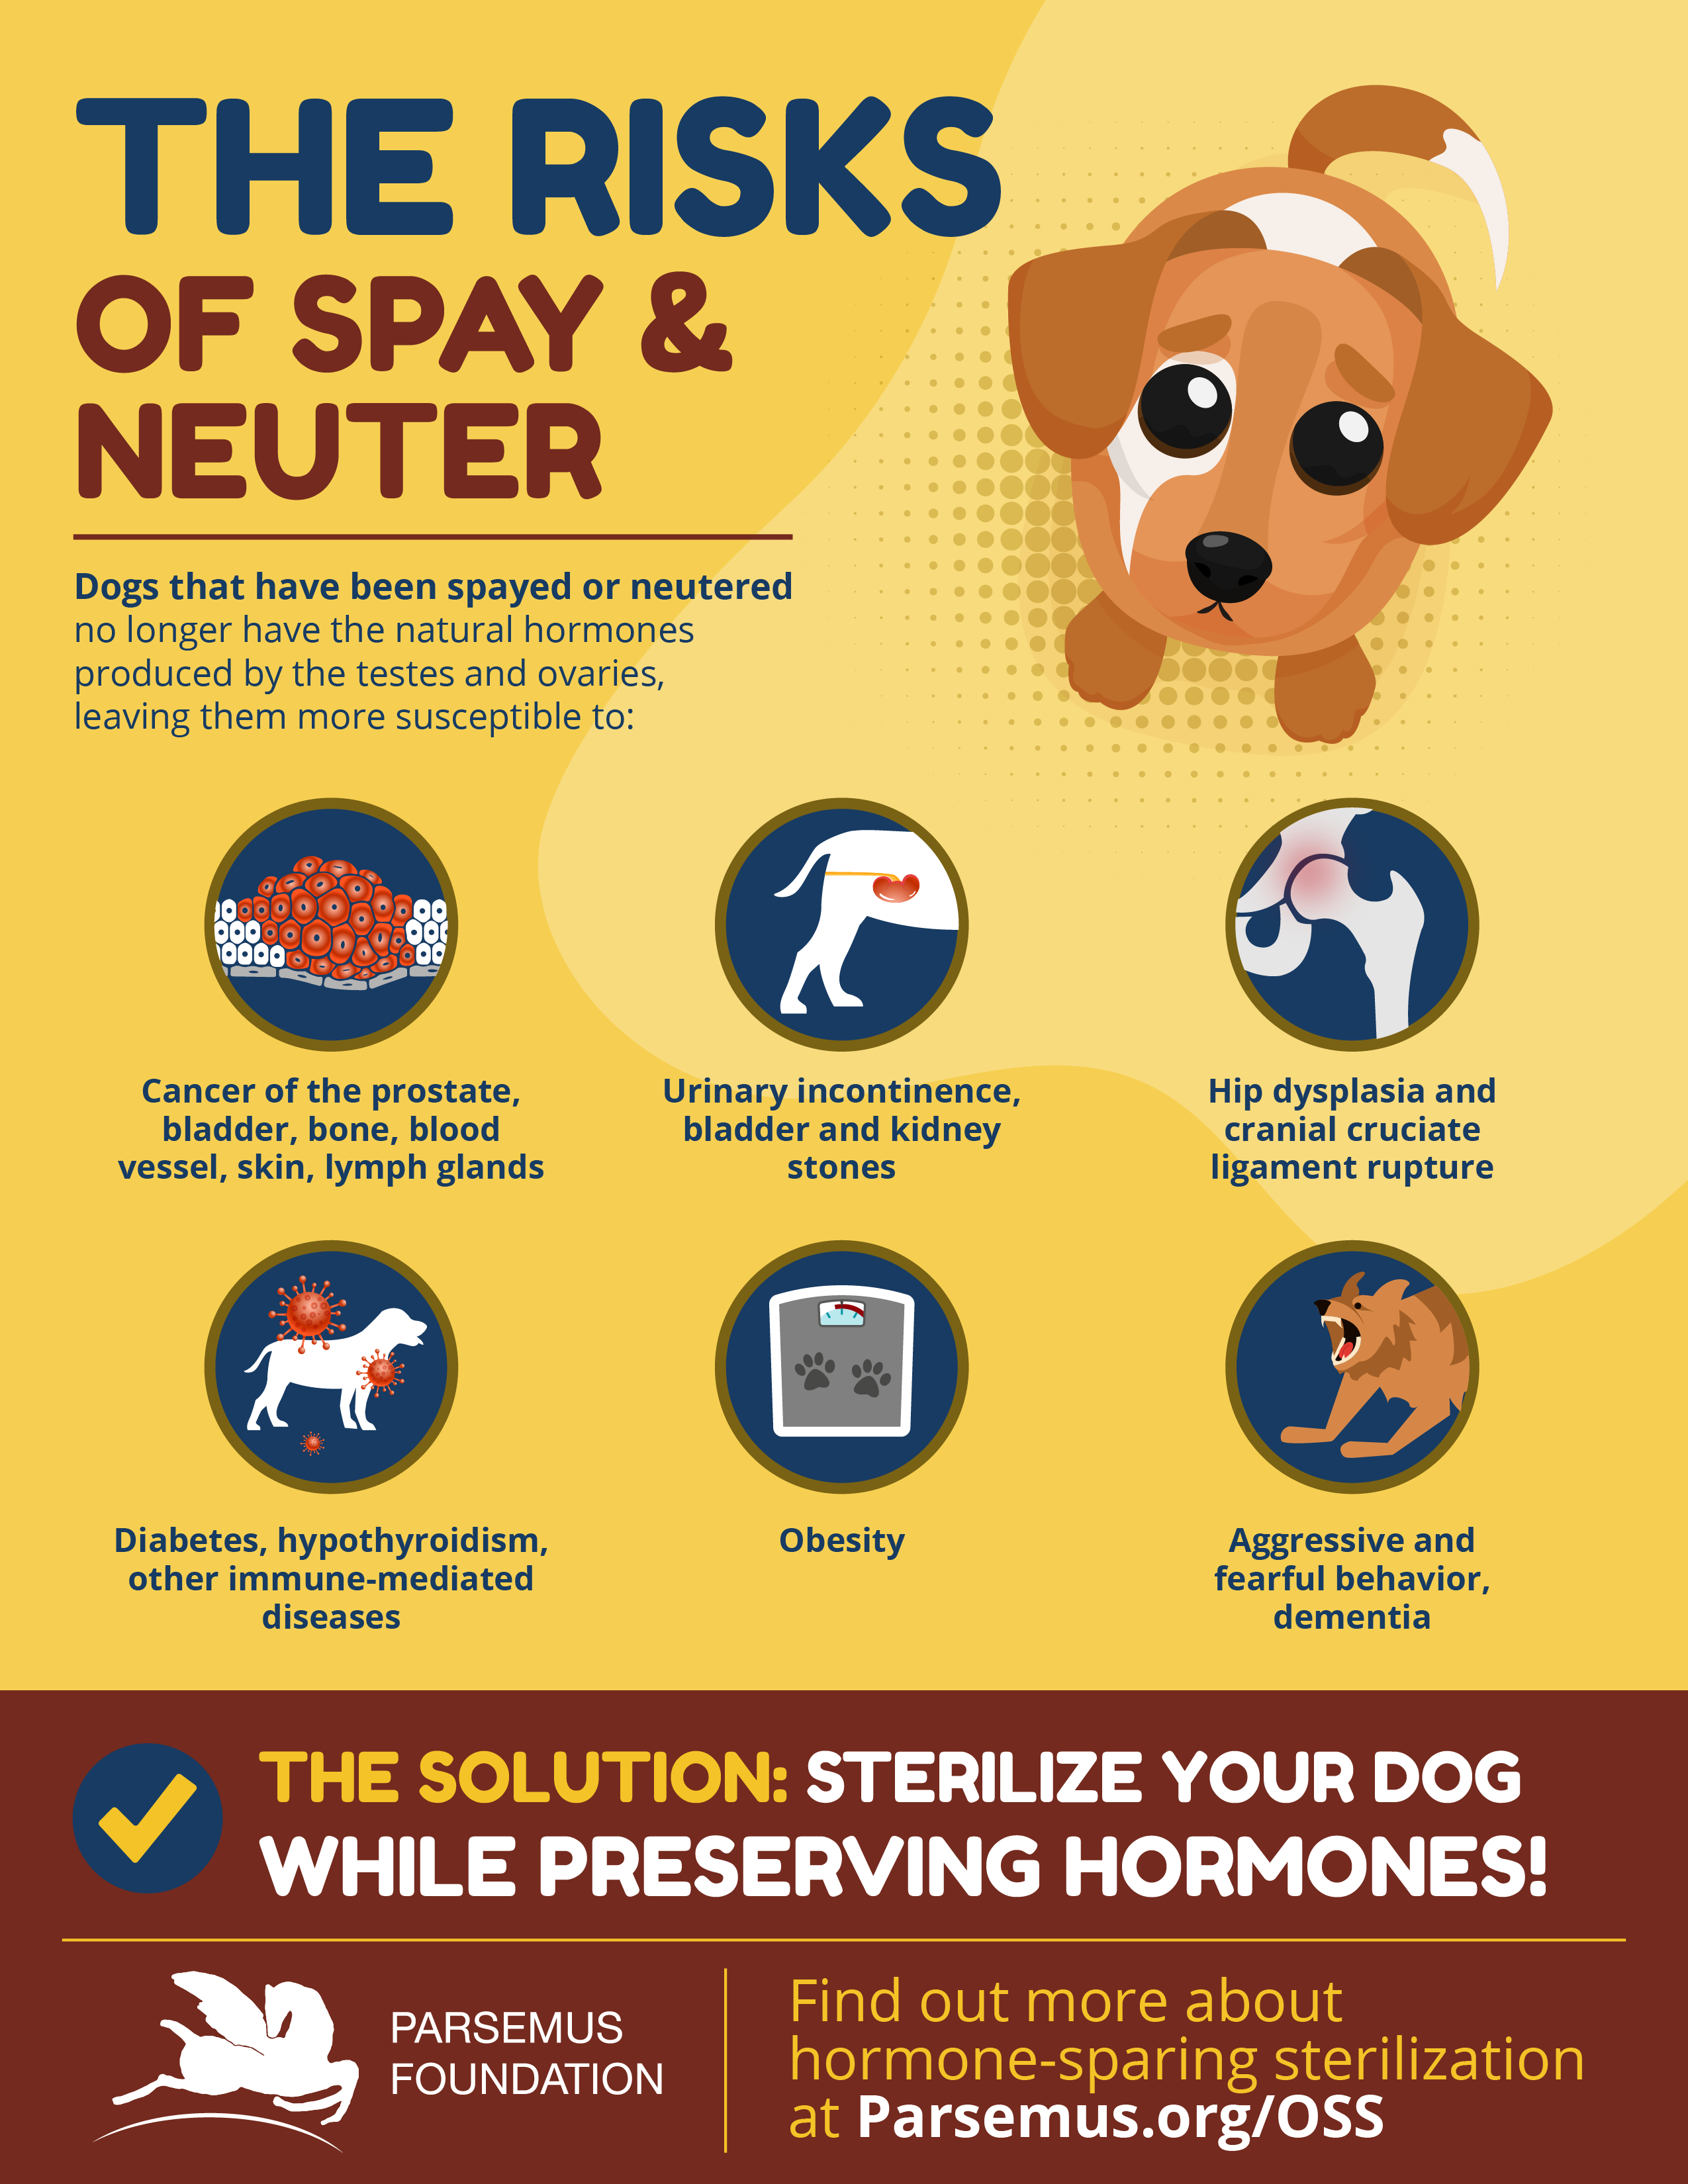 11 Ways to Keep a Dog Calm & Entertained After Spay/Neutering